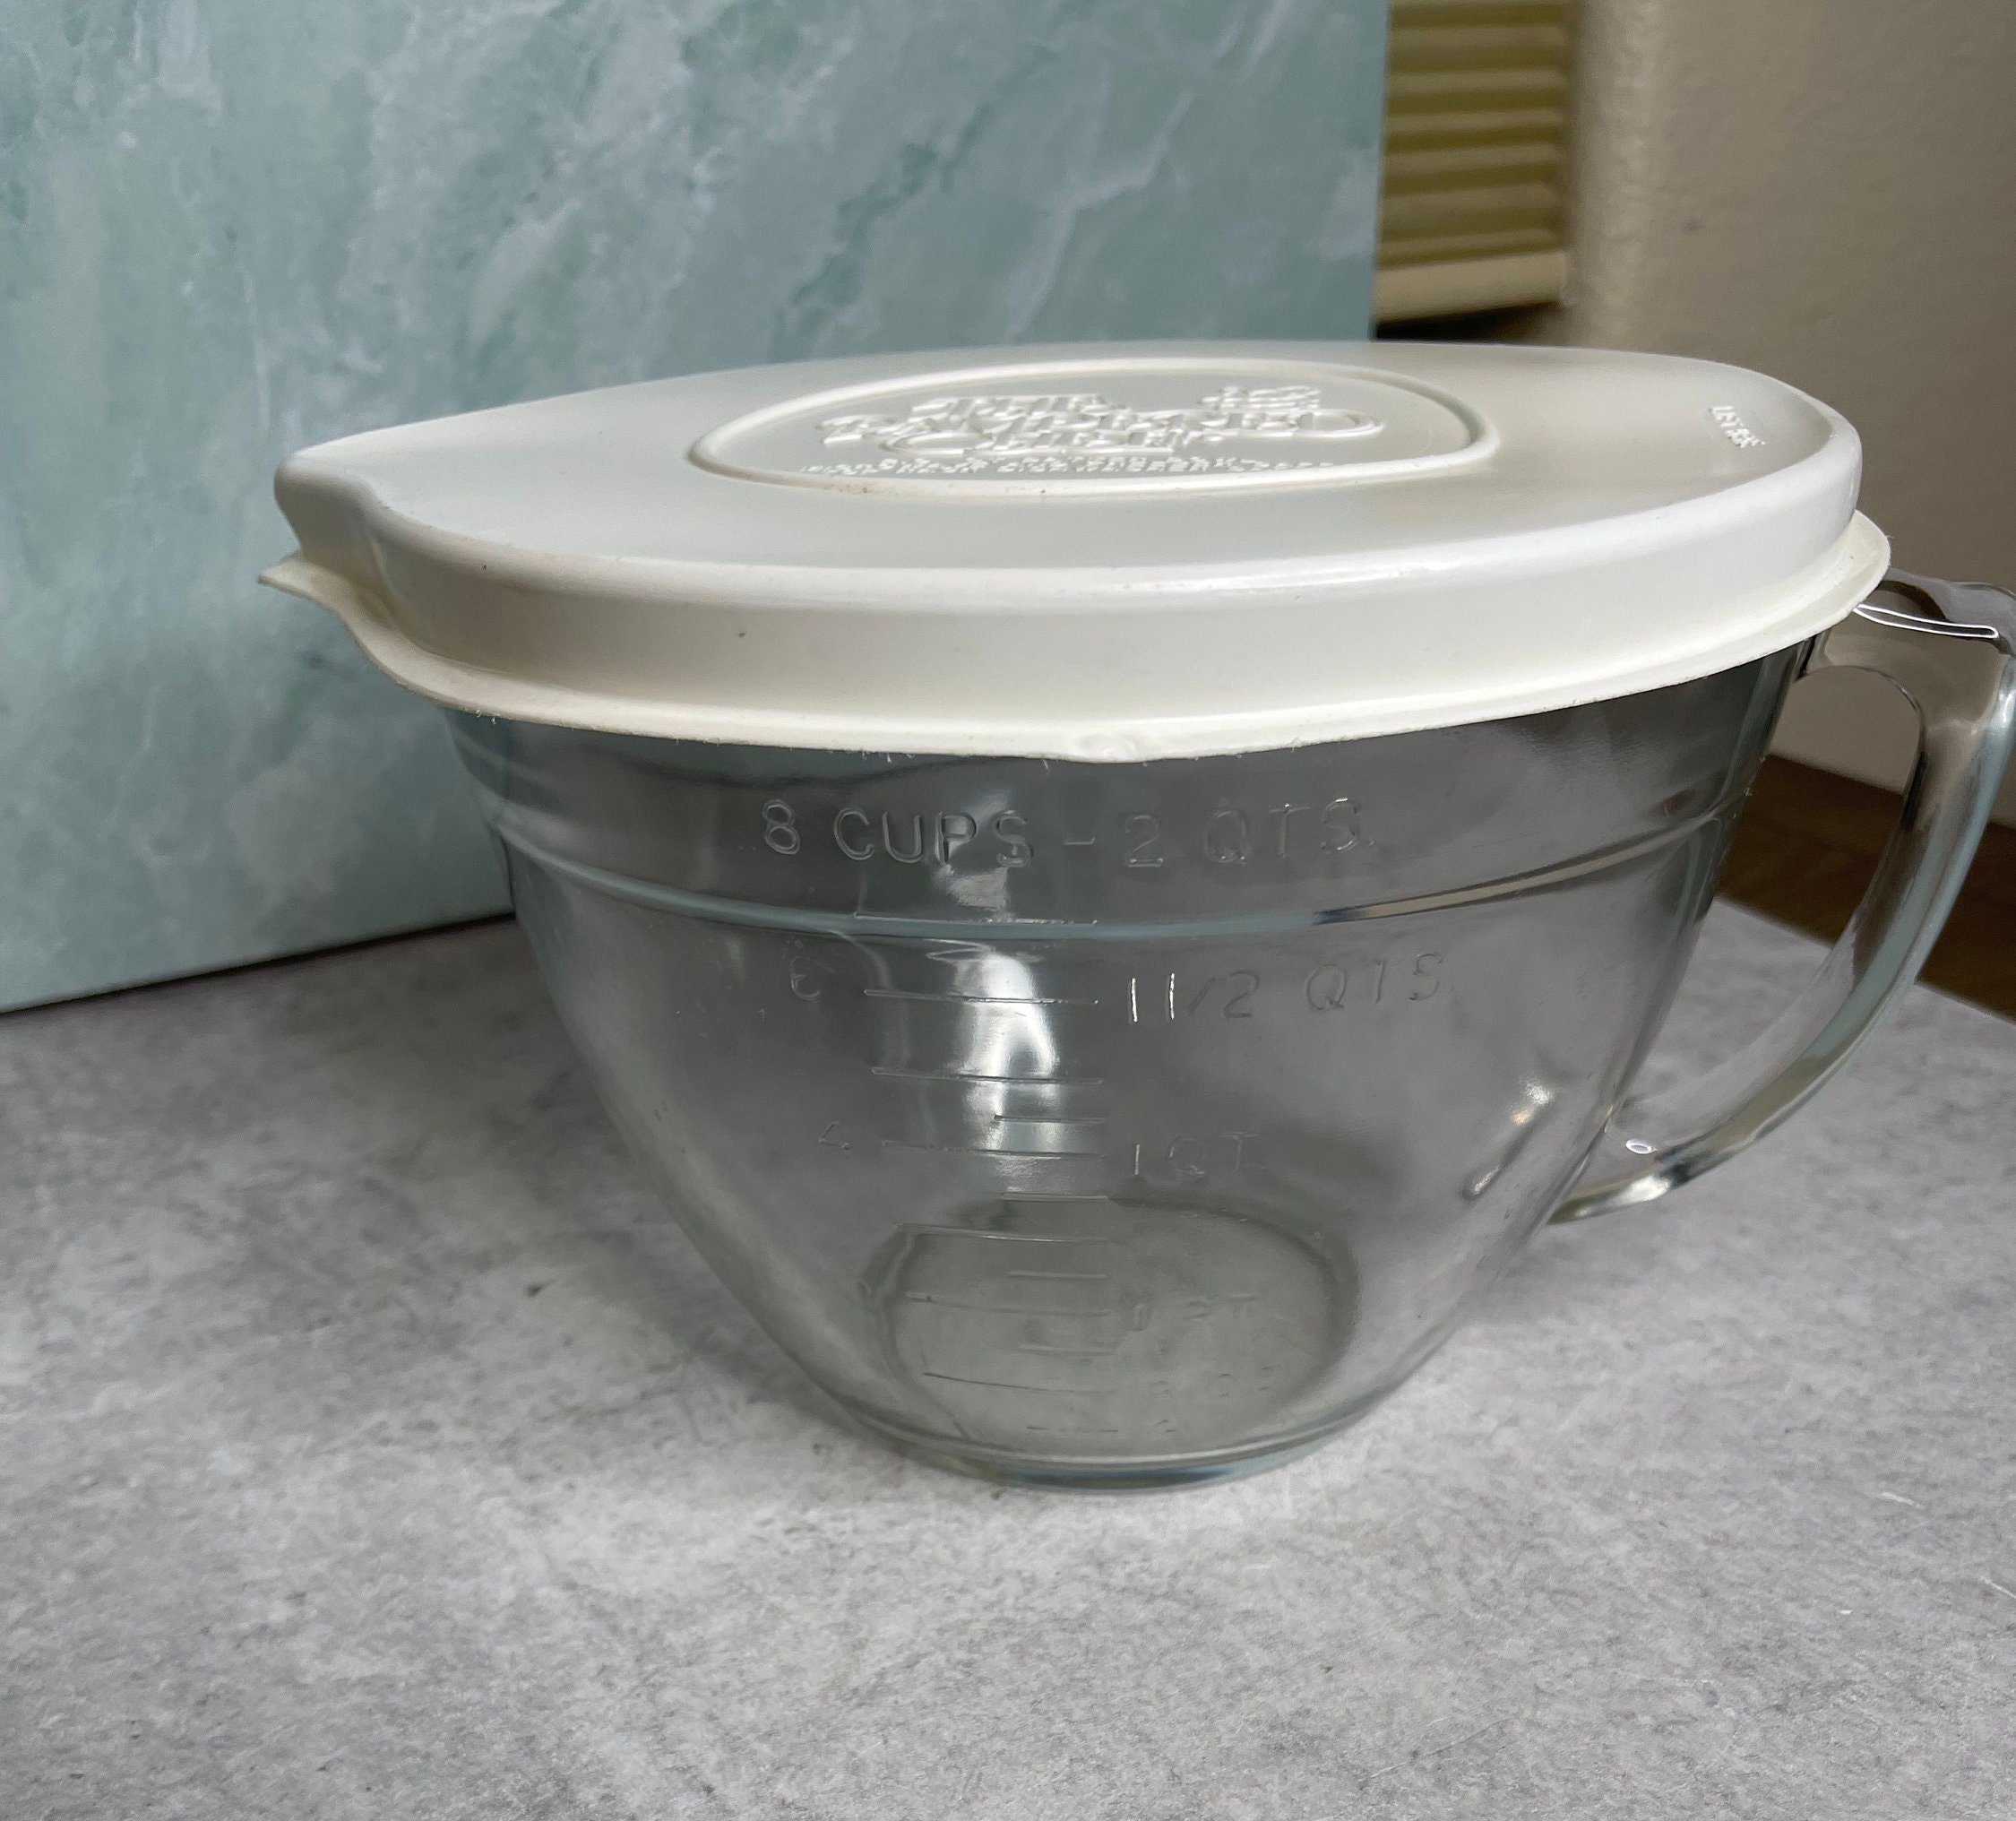 The PAMPERED CHEF Glass Measuring Mixing Batter Bowl No Lid 8 Cup